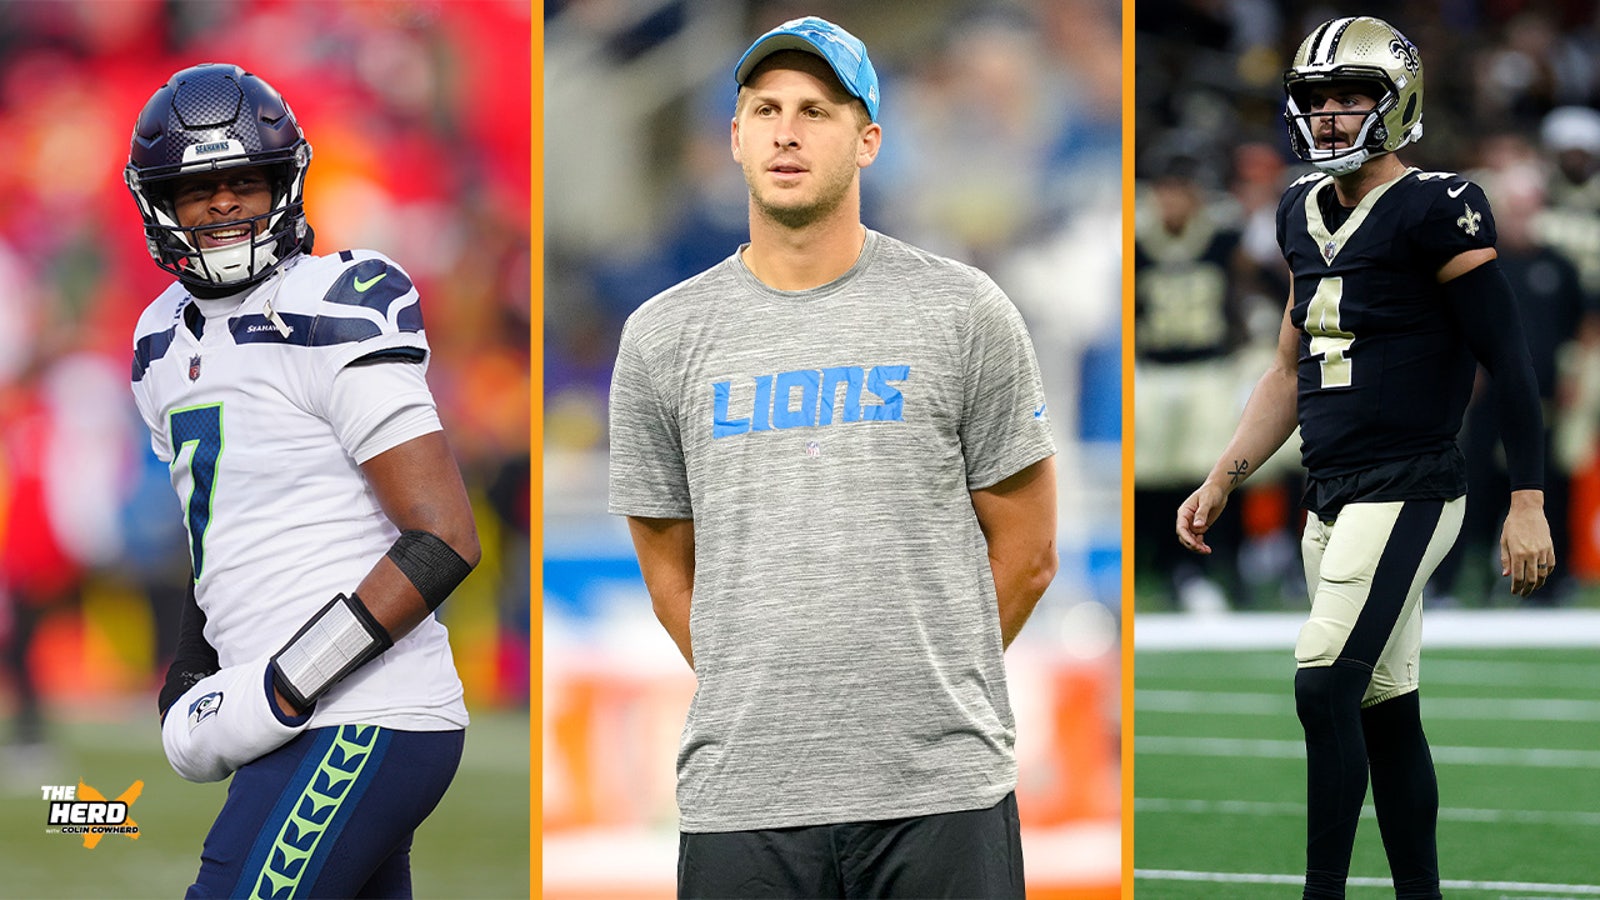 Why Geno Smith, Derek Carr, Jared Goff will lead their teams to division titles